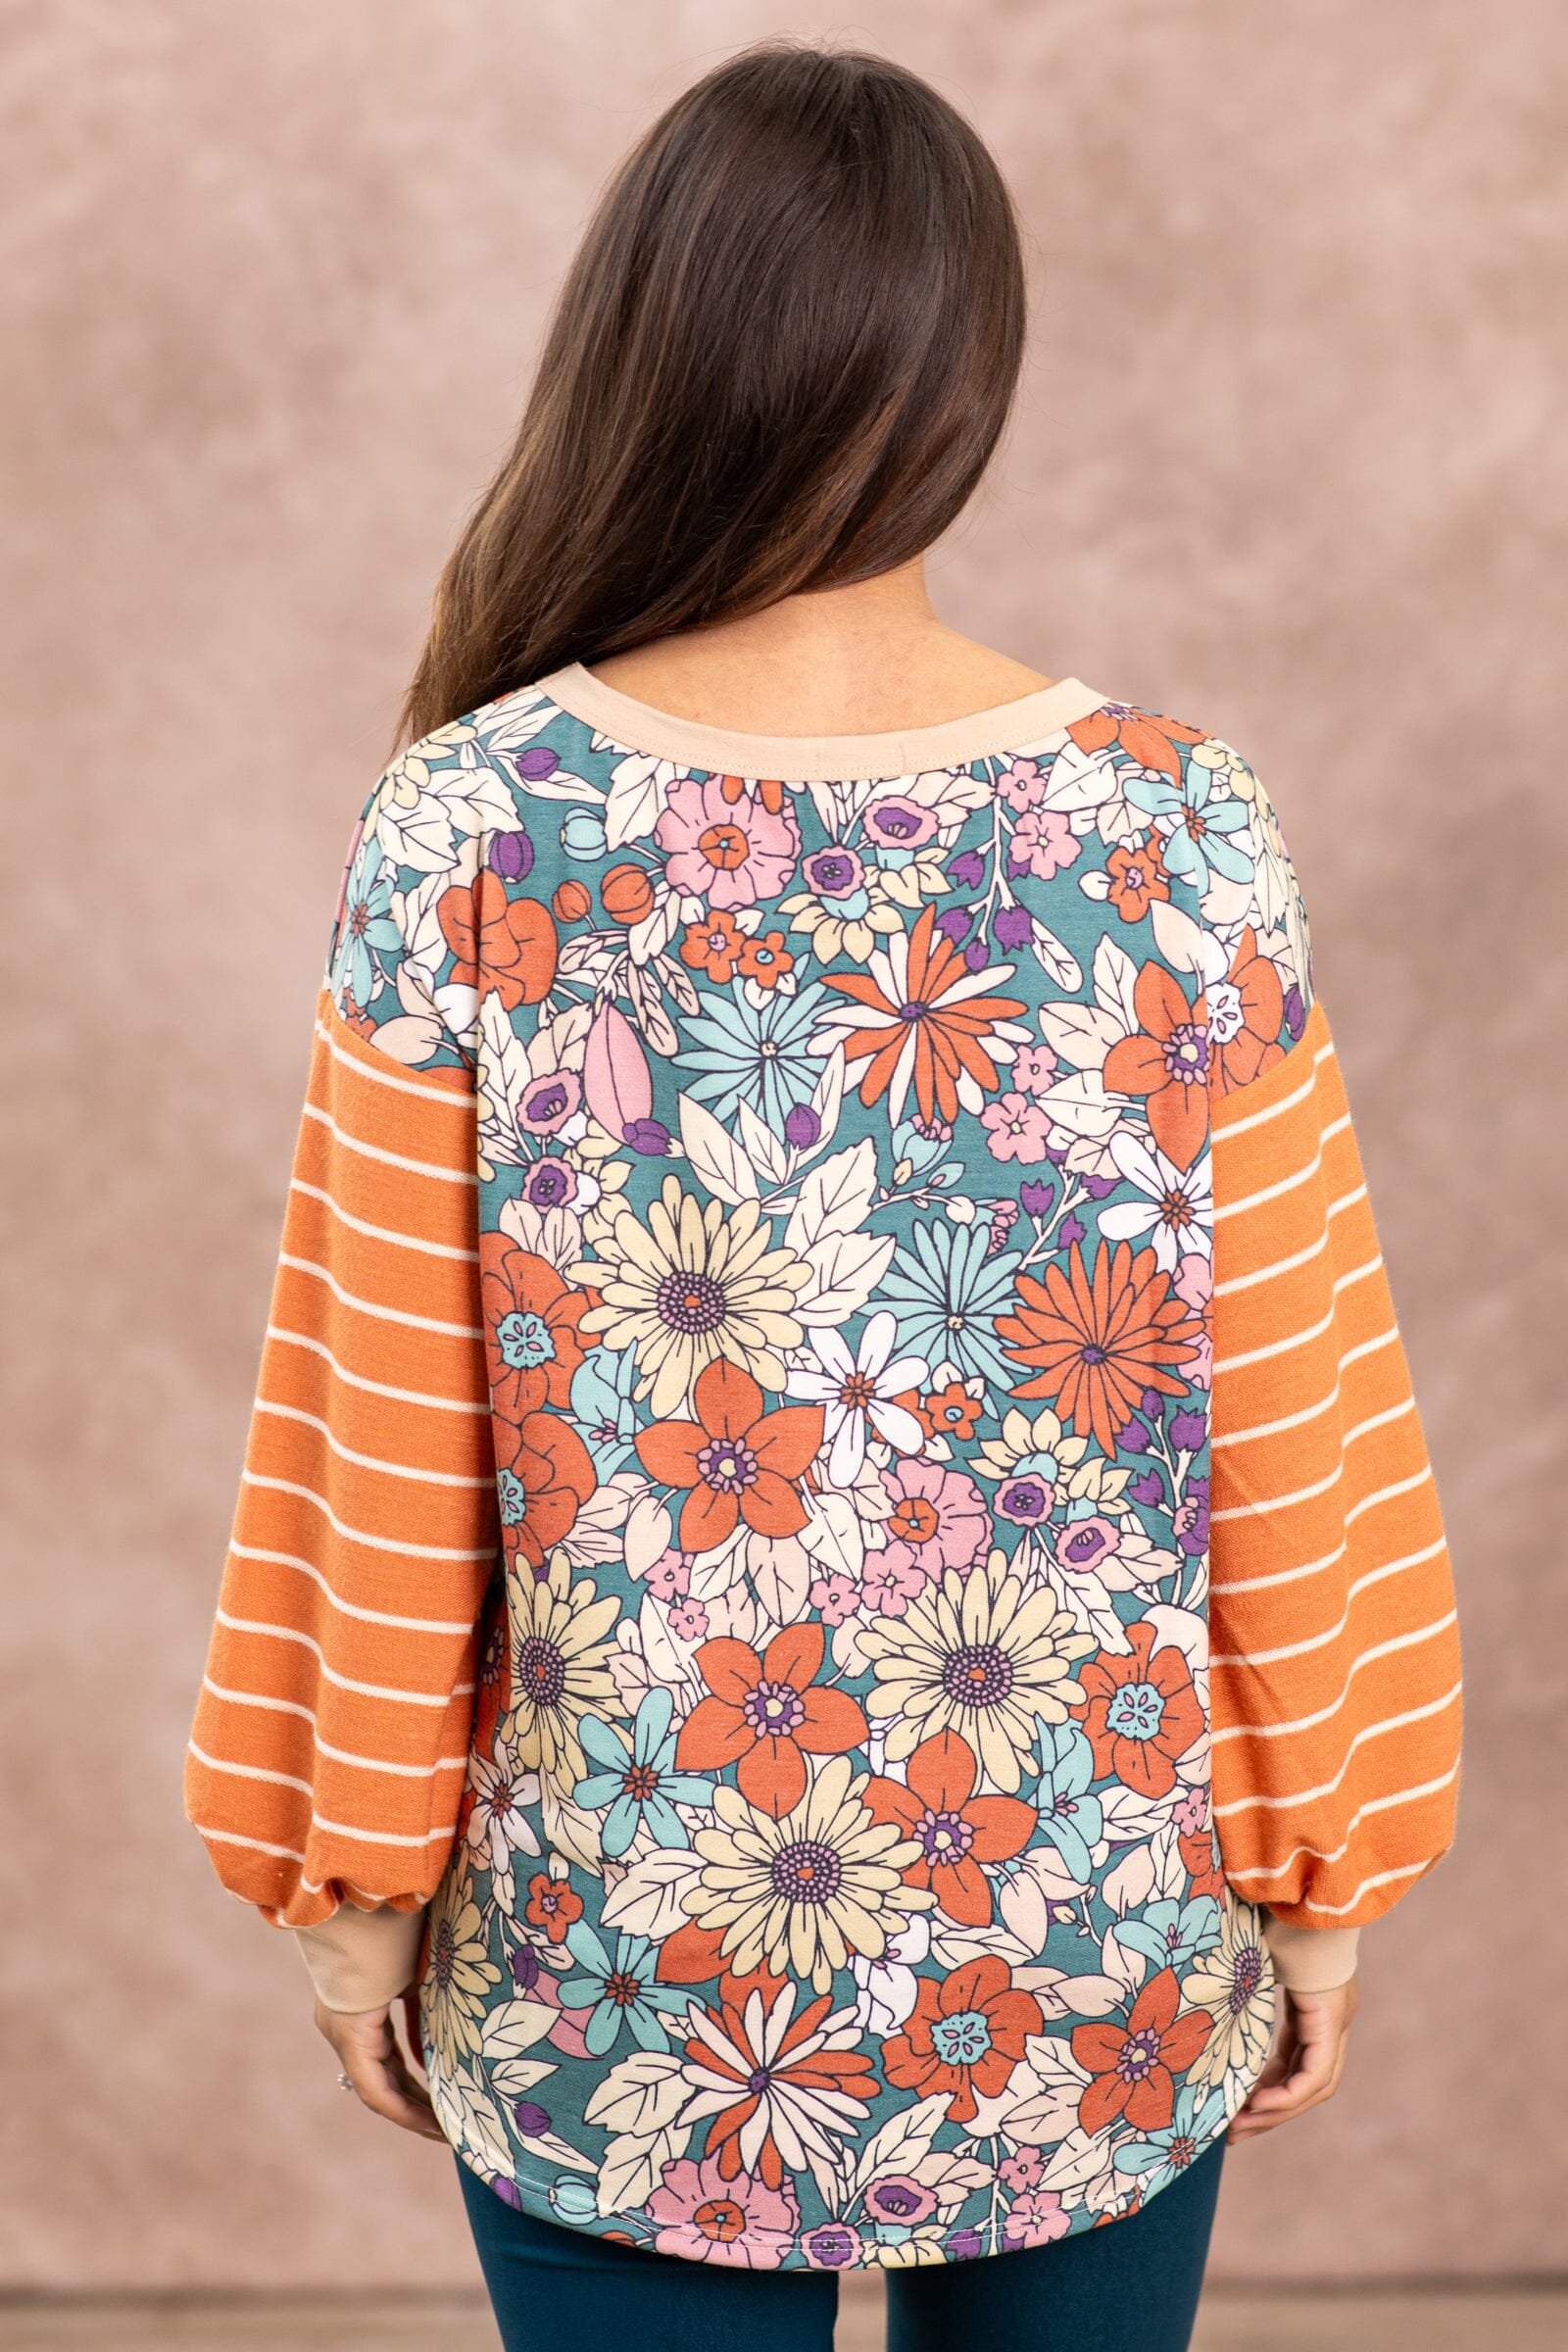 Turquoise Floral Print Top With Stripe Sleeves - Filly Flair